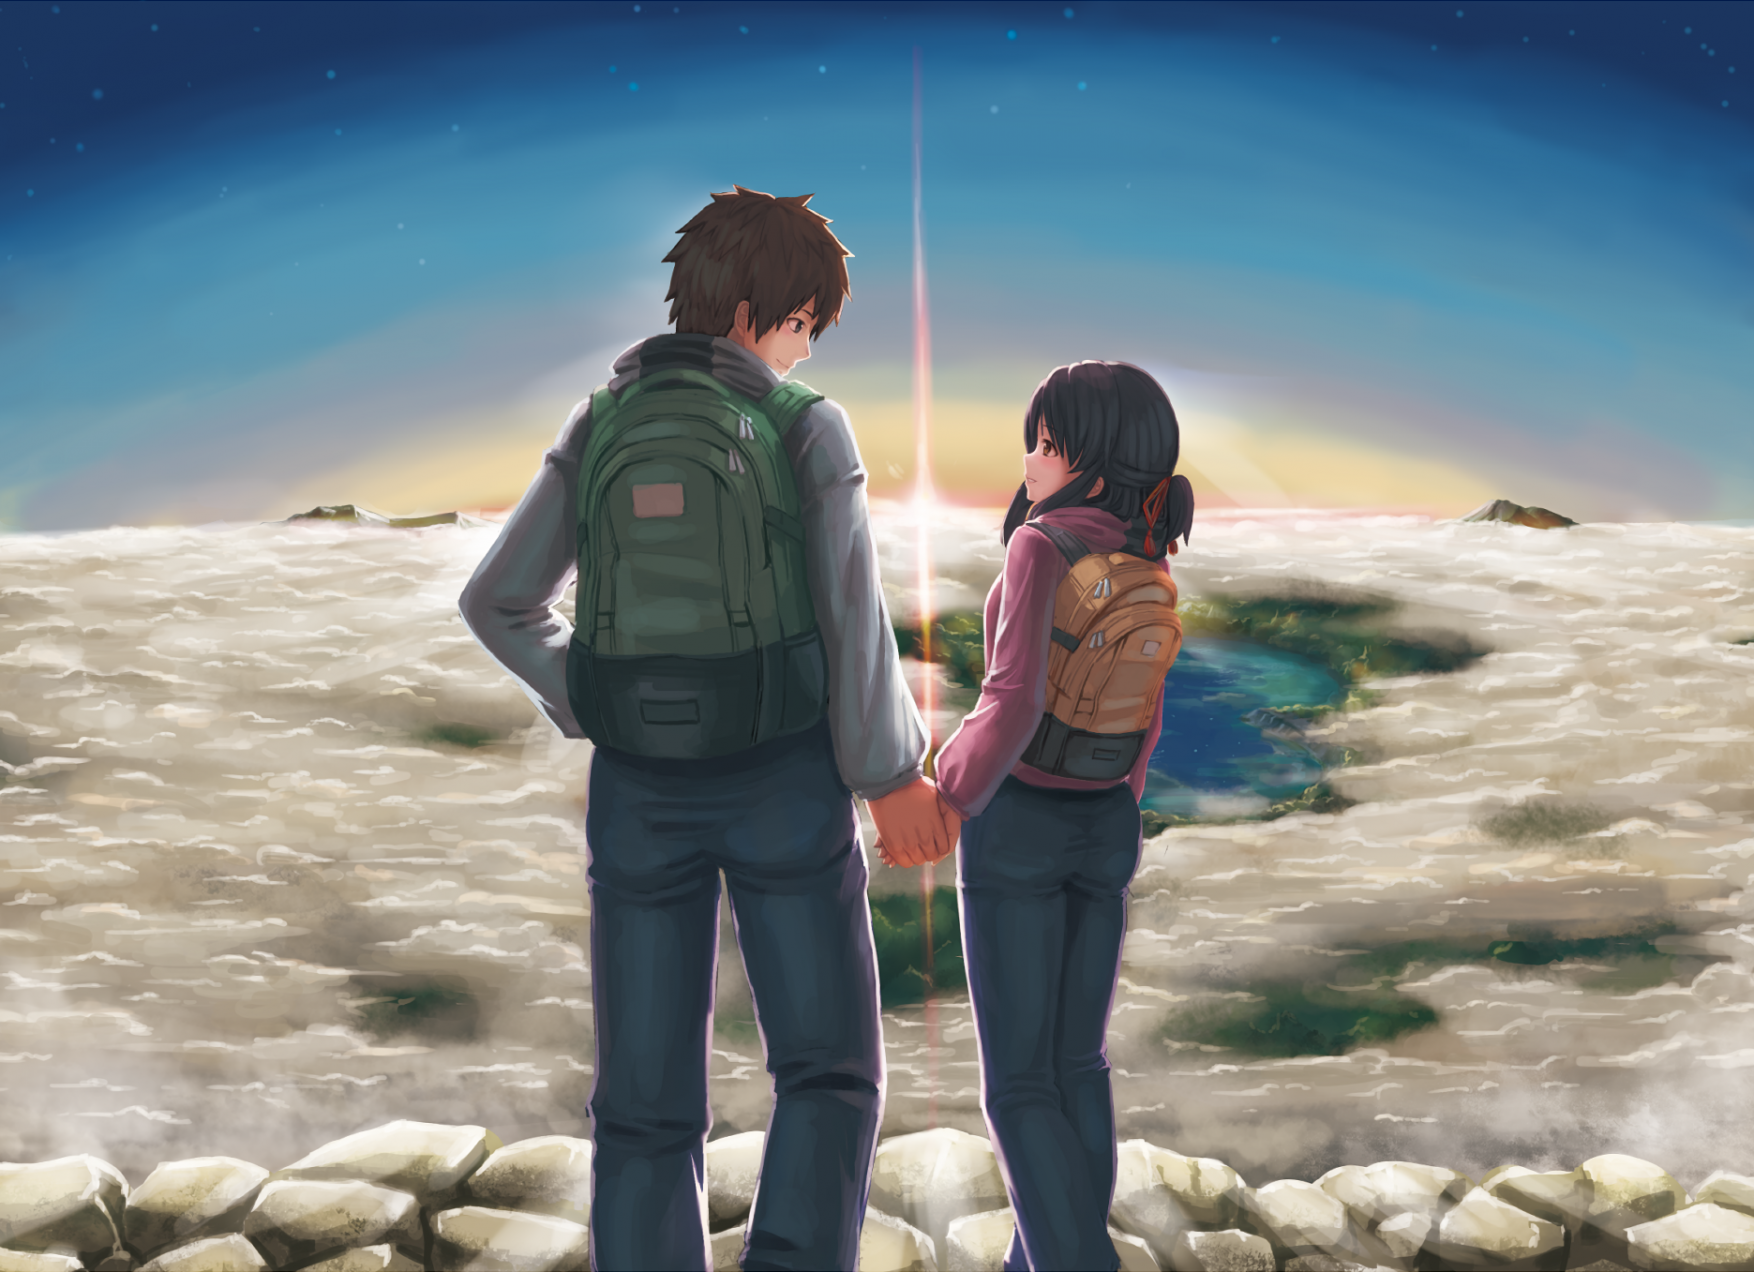 BEST WALLPAPER: Your Name Wallpaper PC